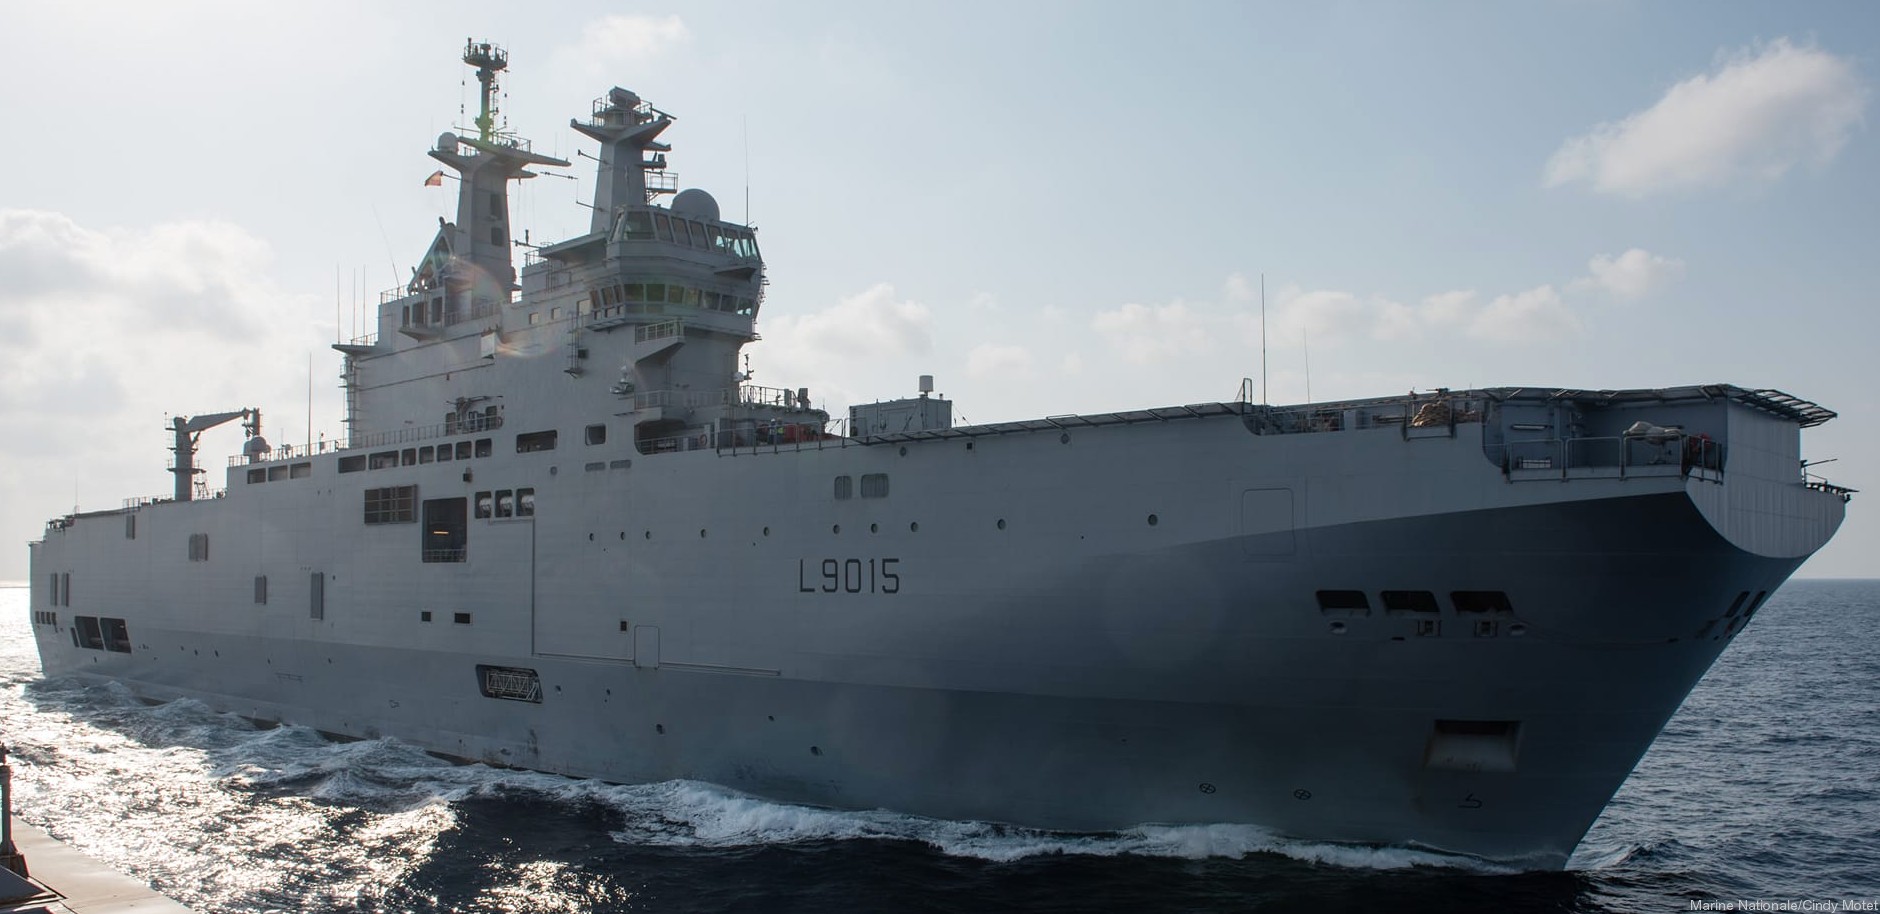 l-9015 fs dixmude mistral class amphibious assault command ship bpc french navy marine nationale 15